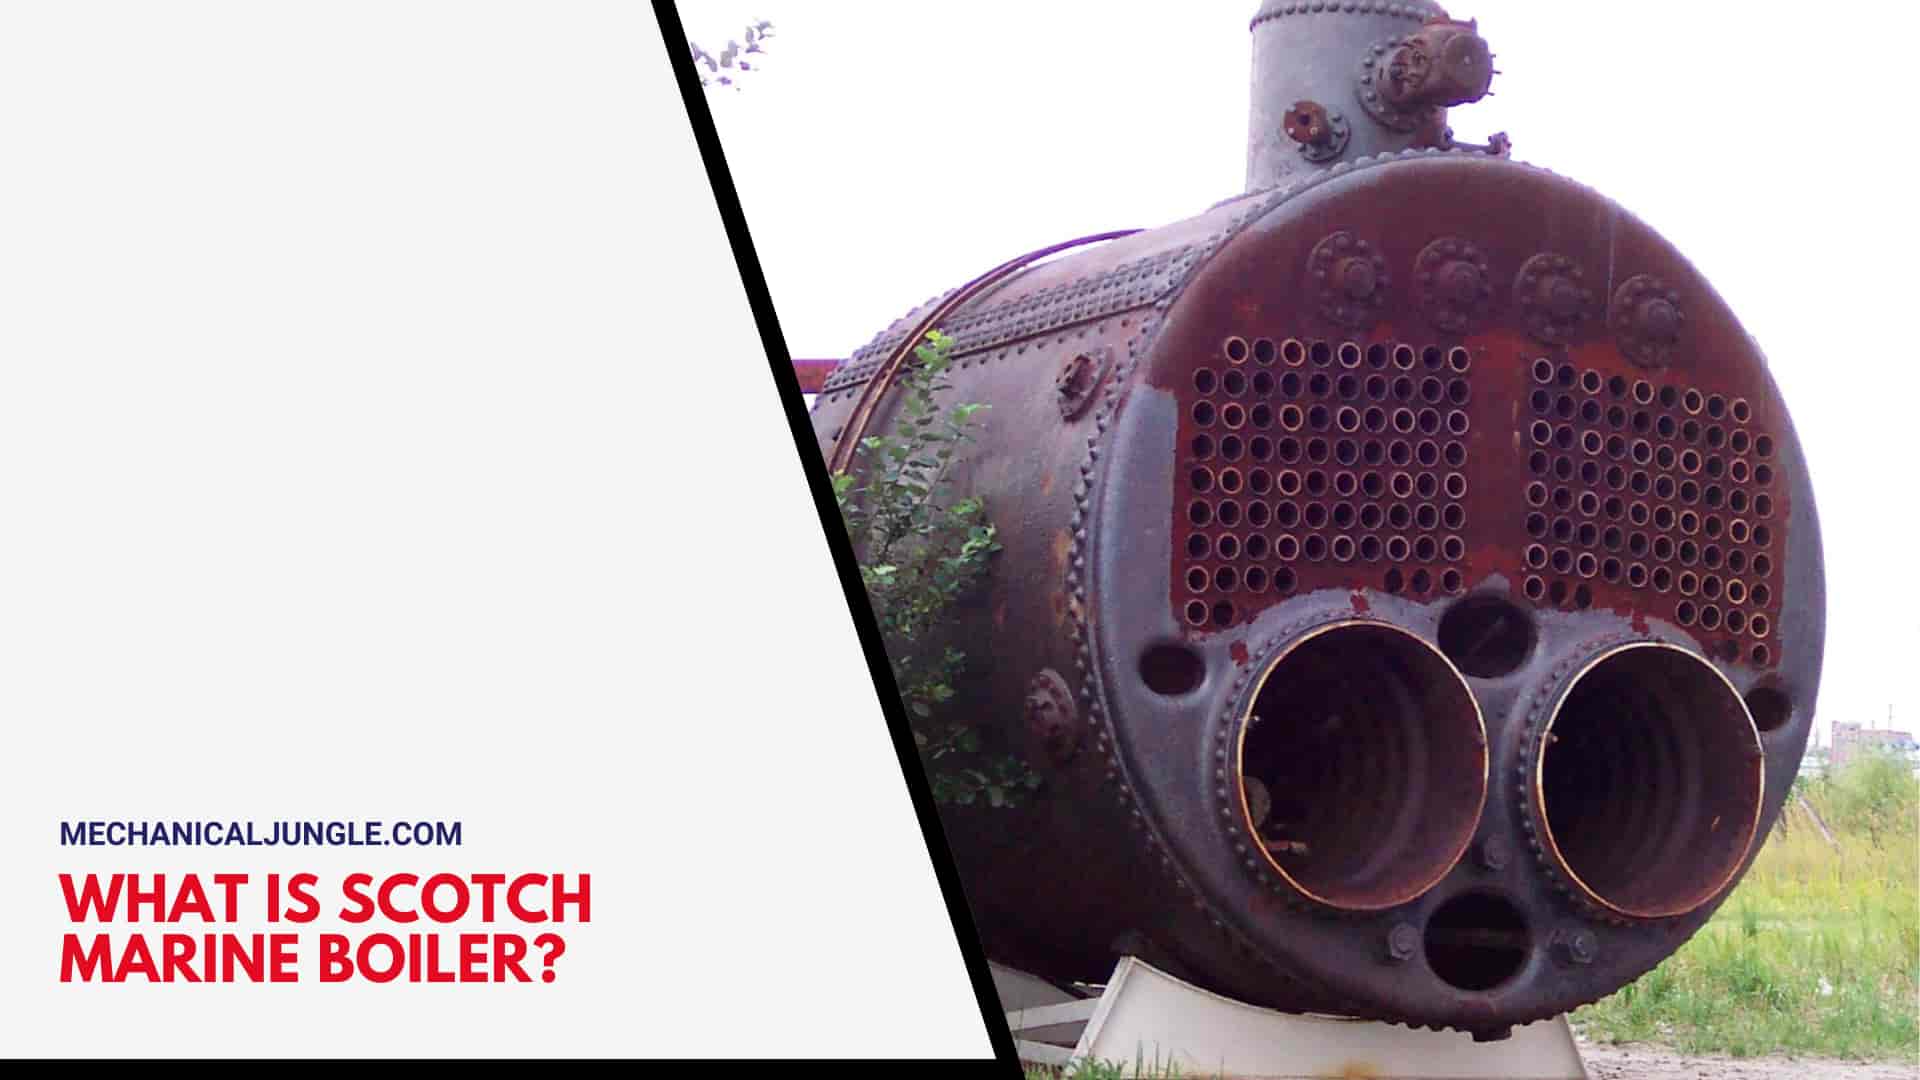 What Is Scotch Marine Boiler?